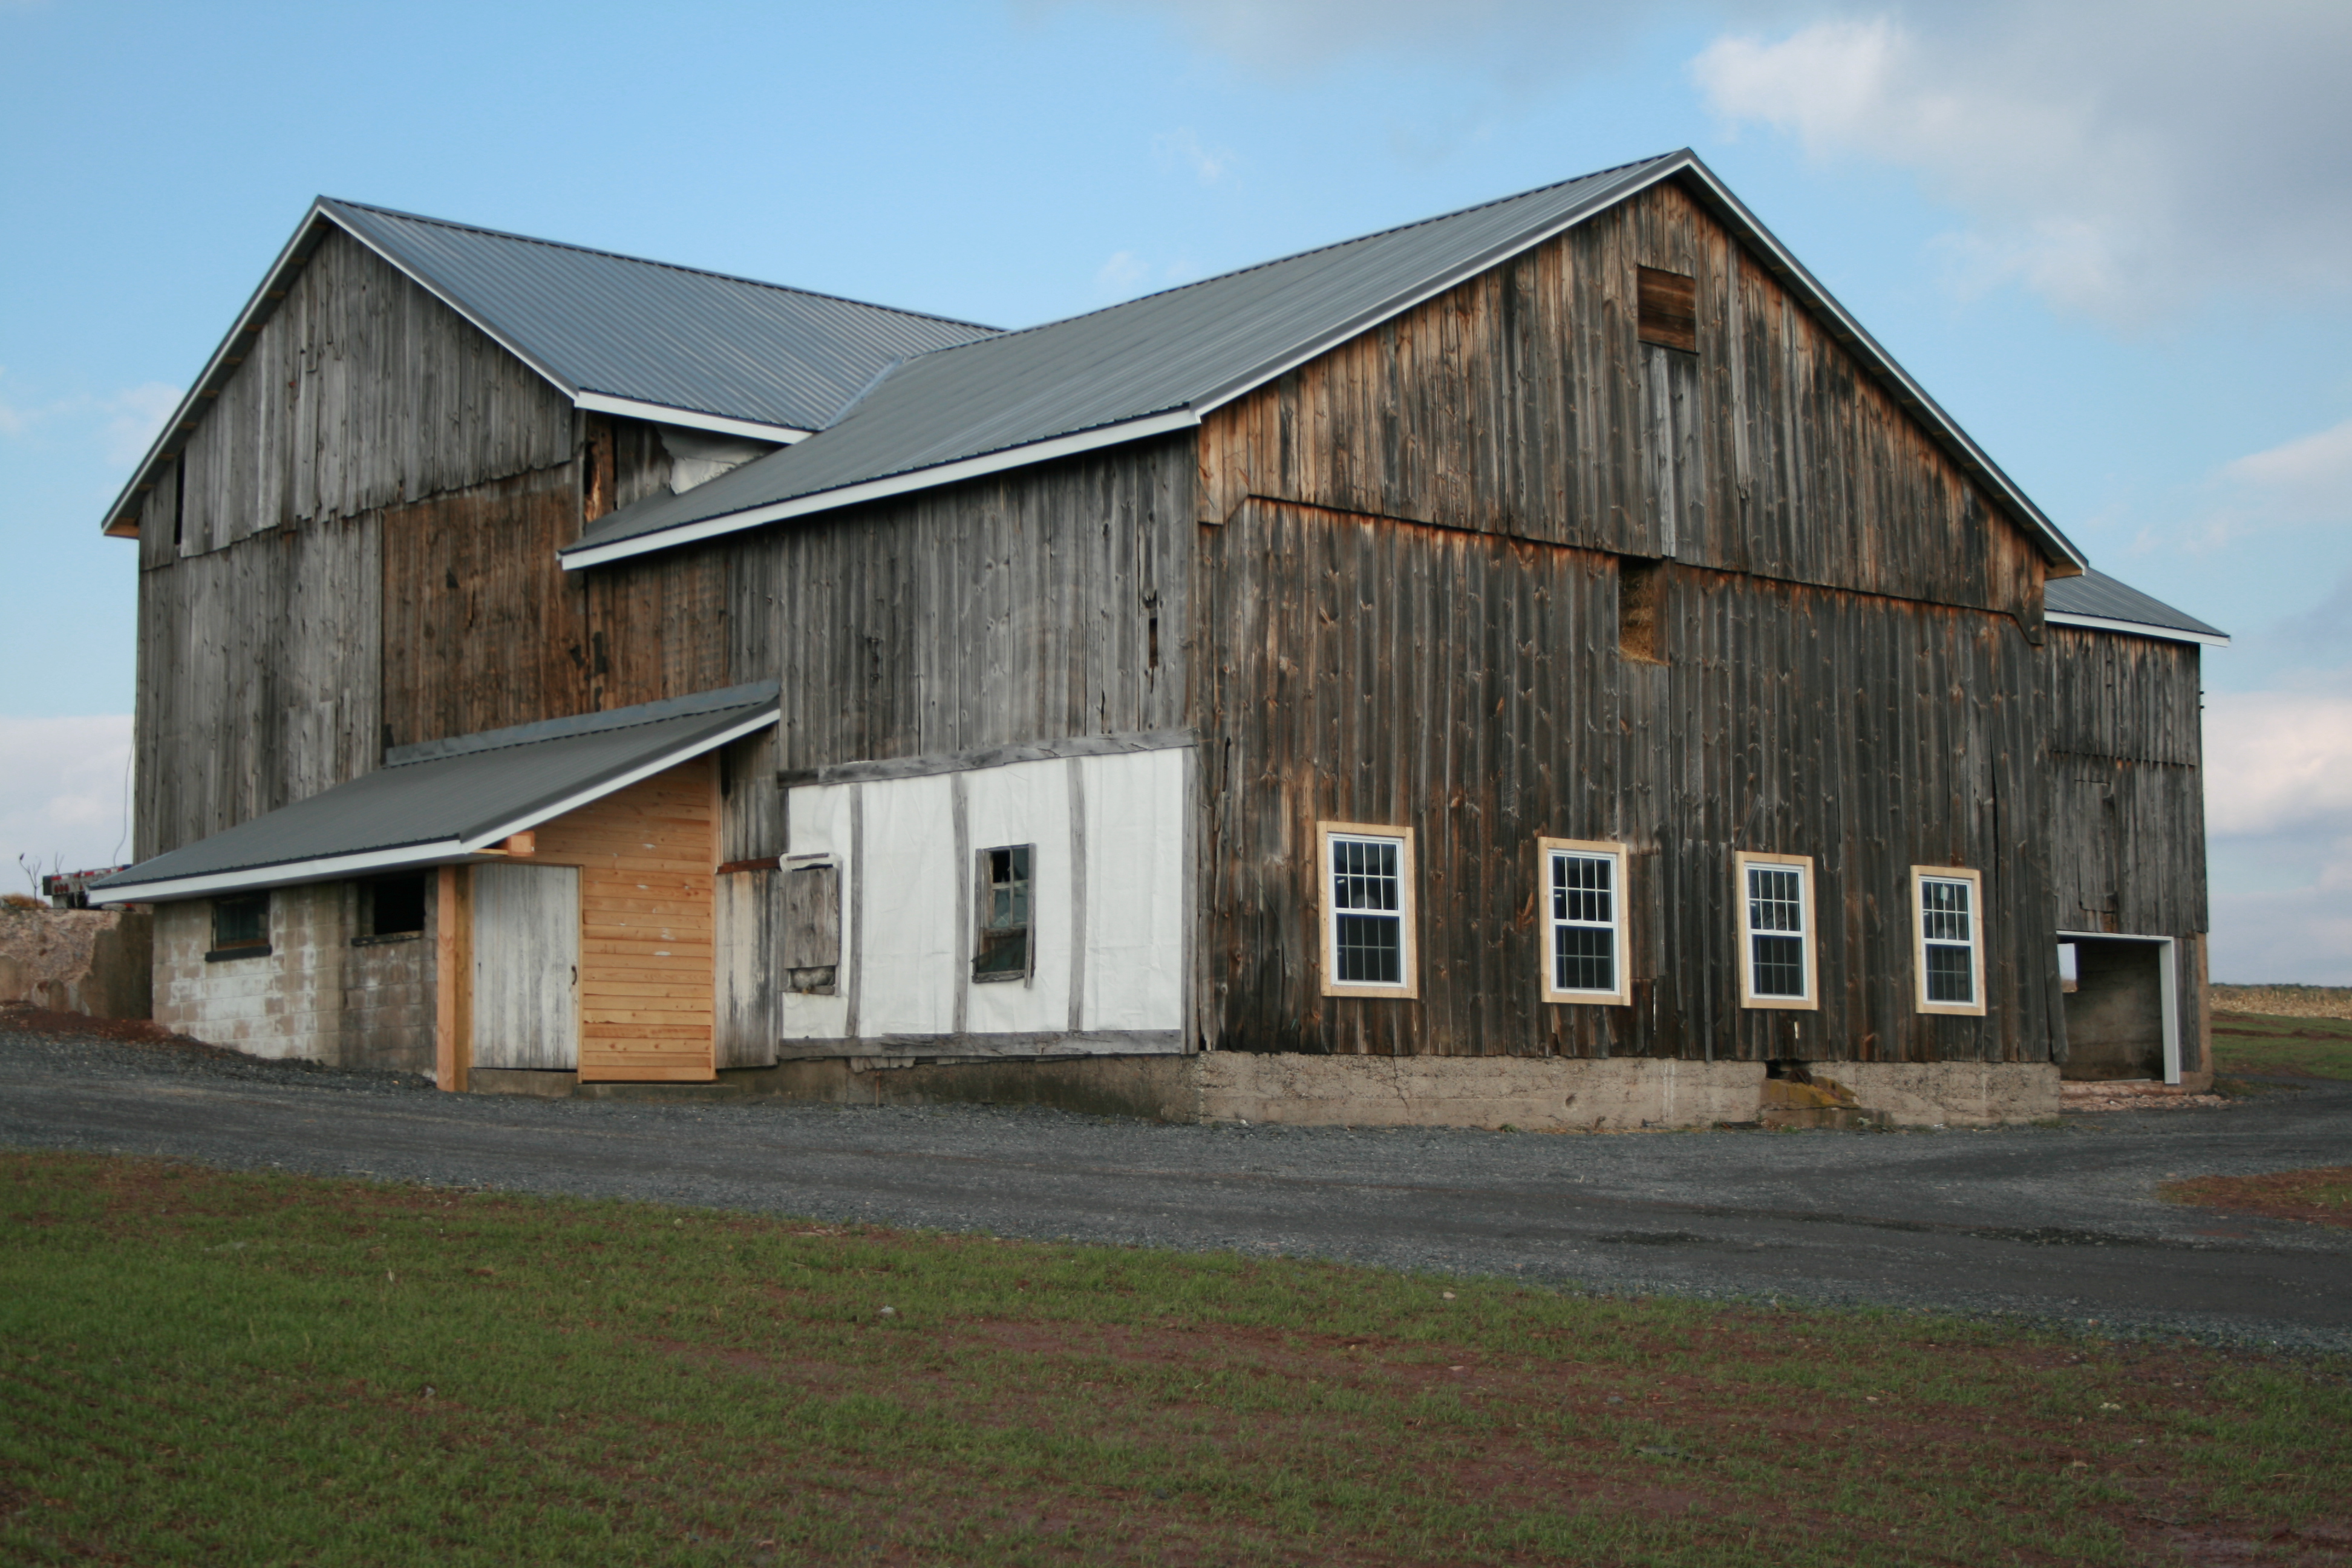 Old Barn, Aged, Barn, Building, Country, HQ Photo